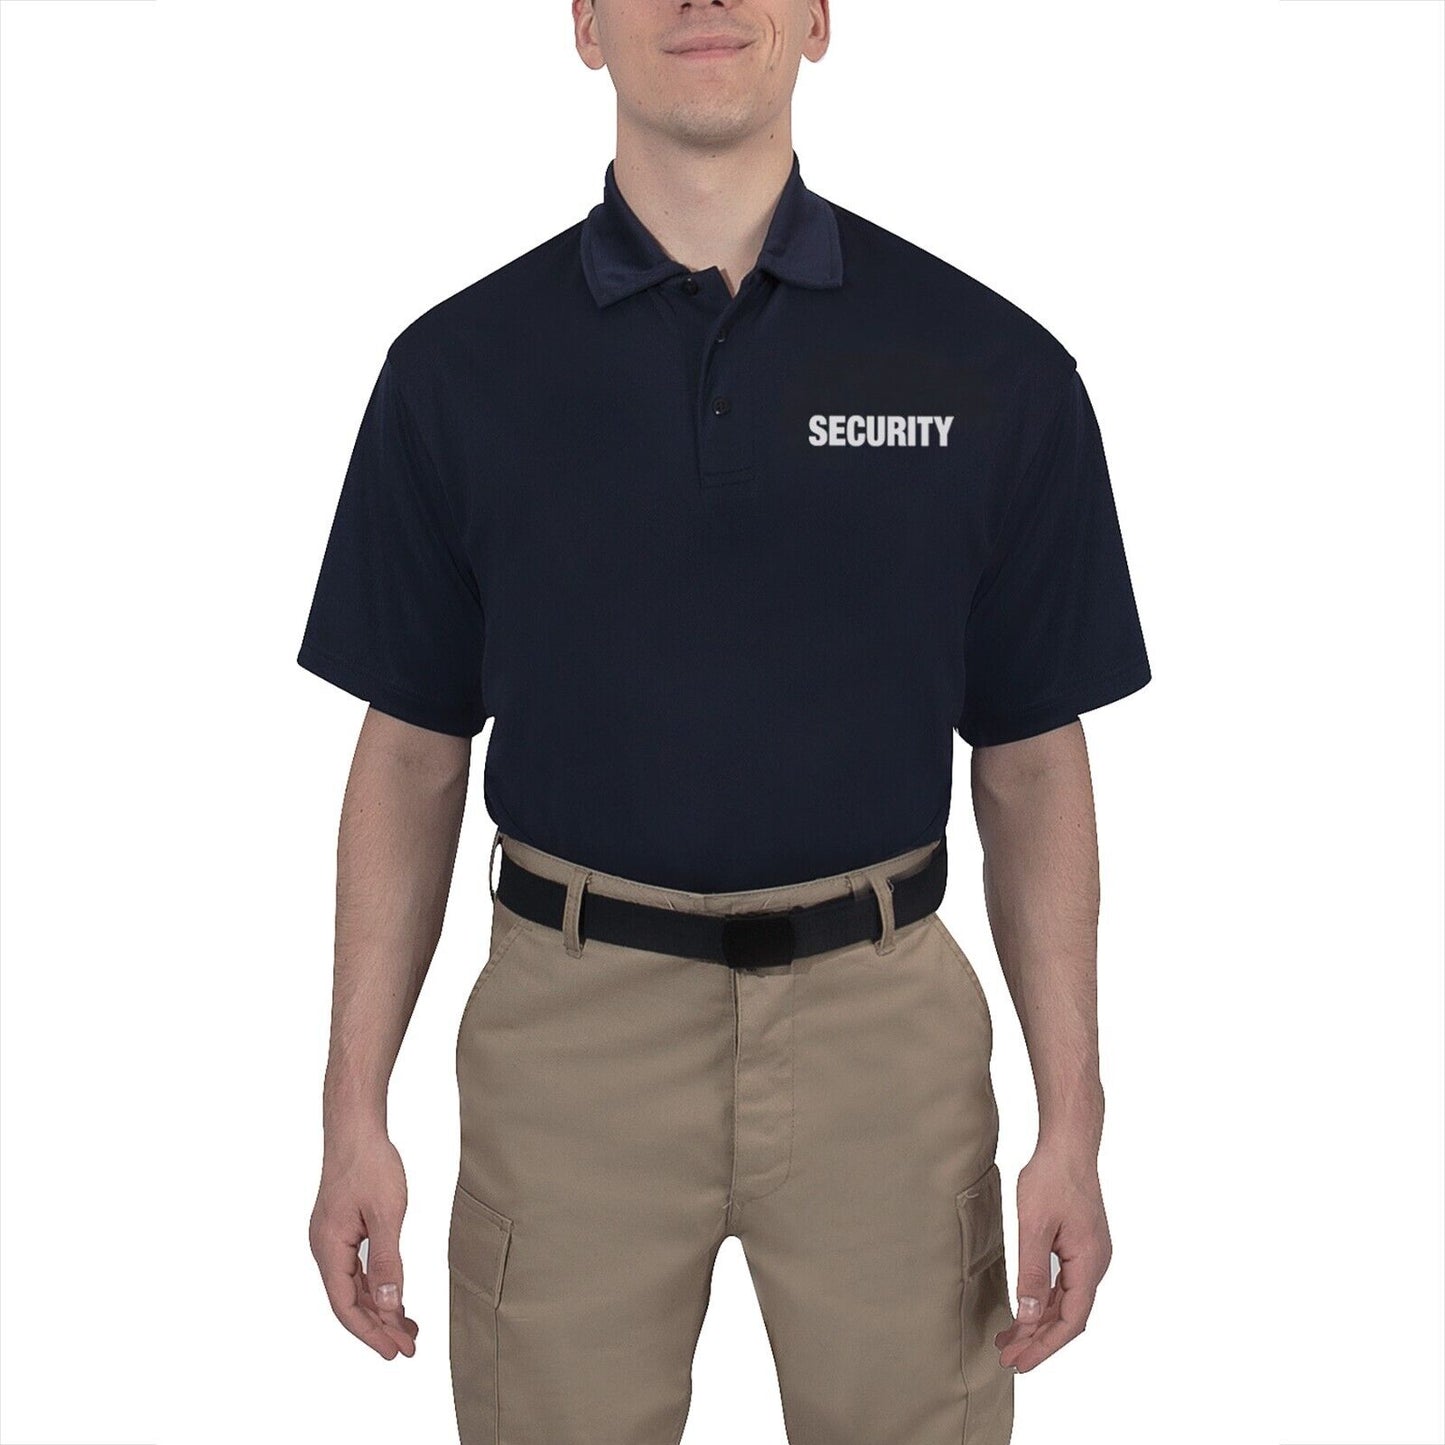 Men's Moisture Wicking Security Polo Shirt Midnight Navy or Safety Green